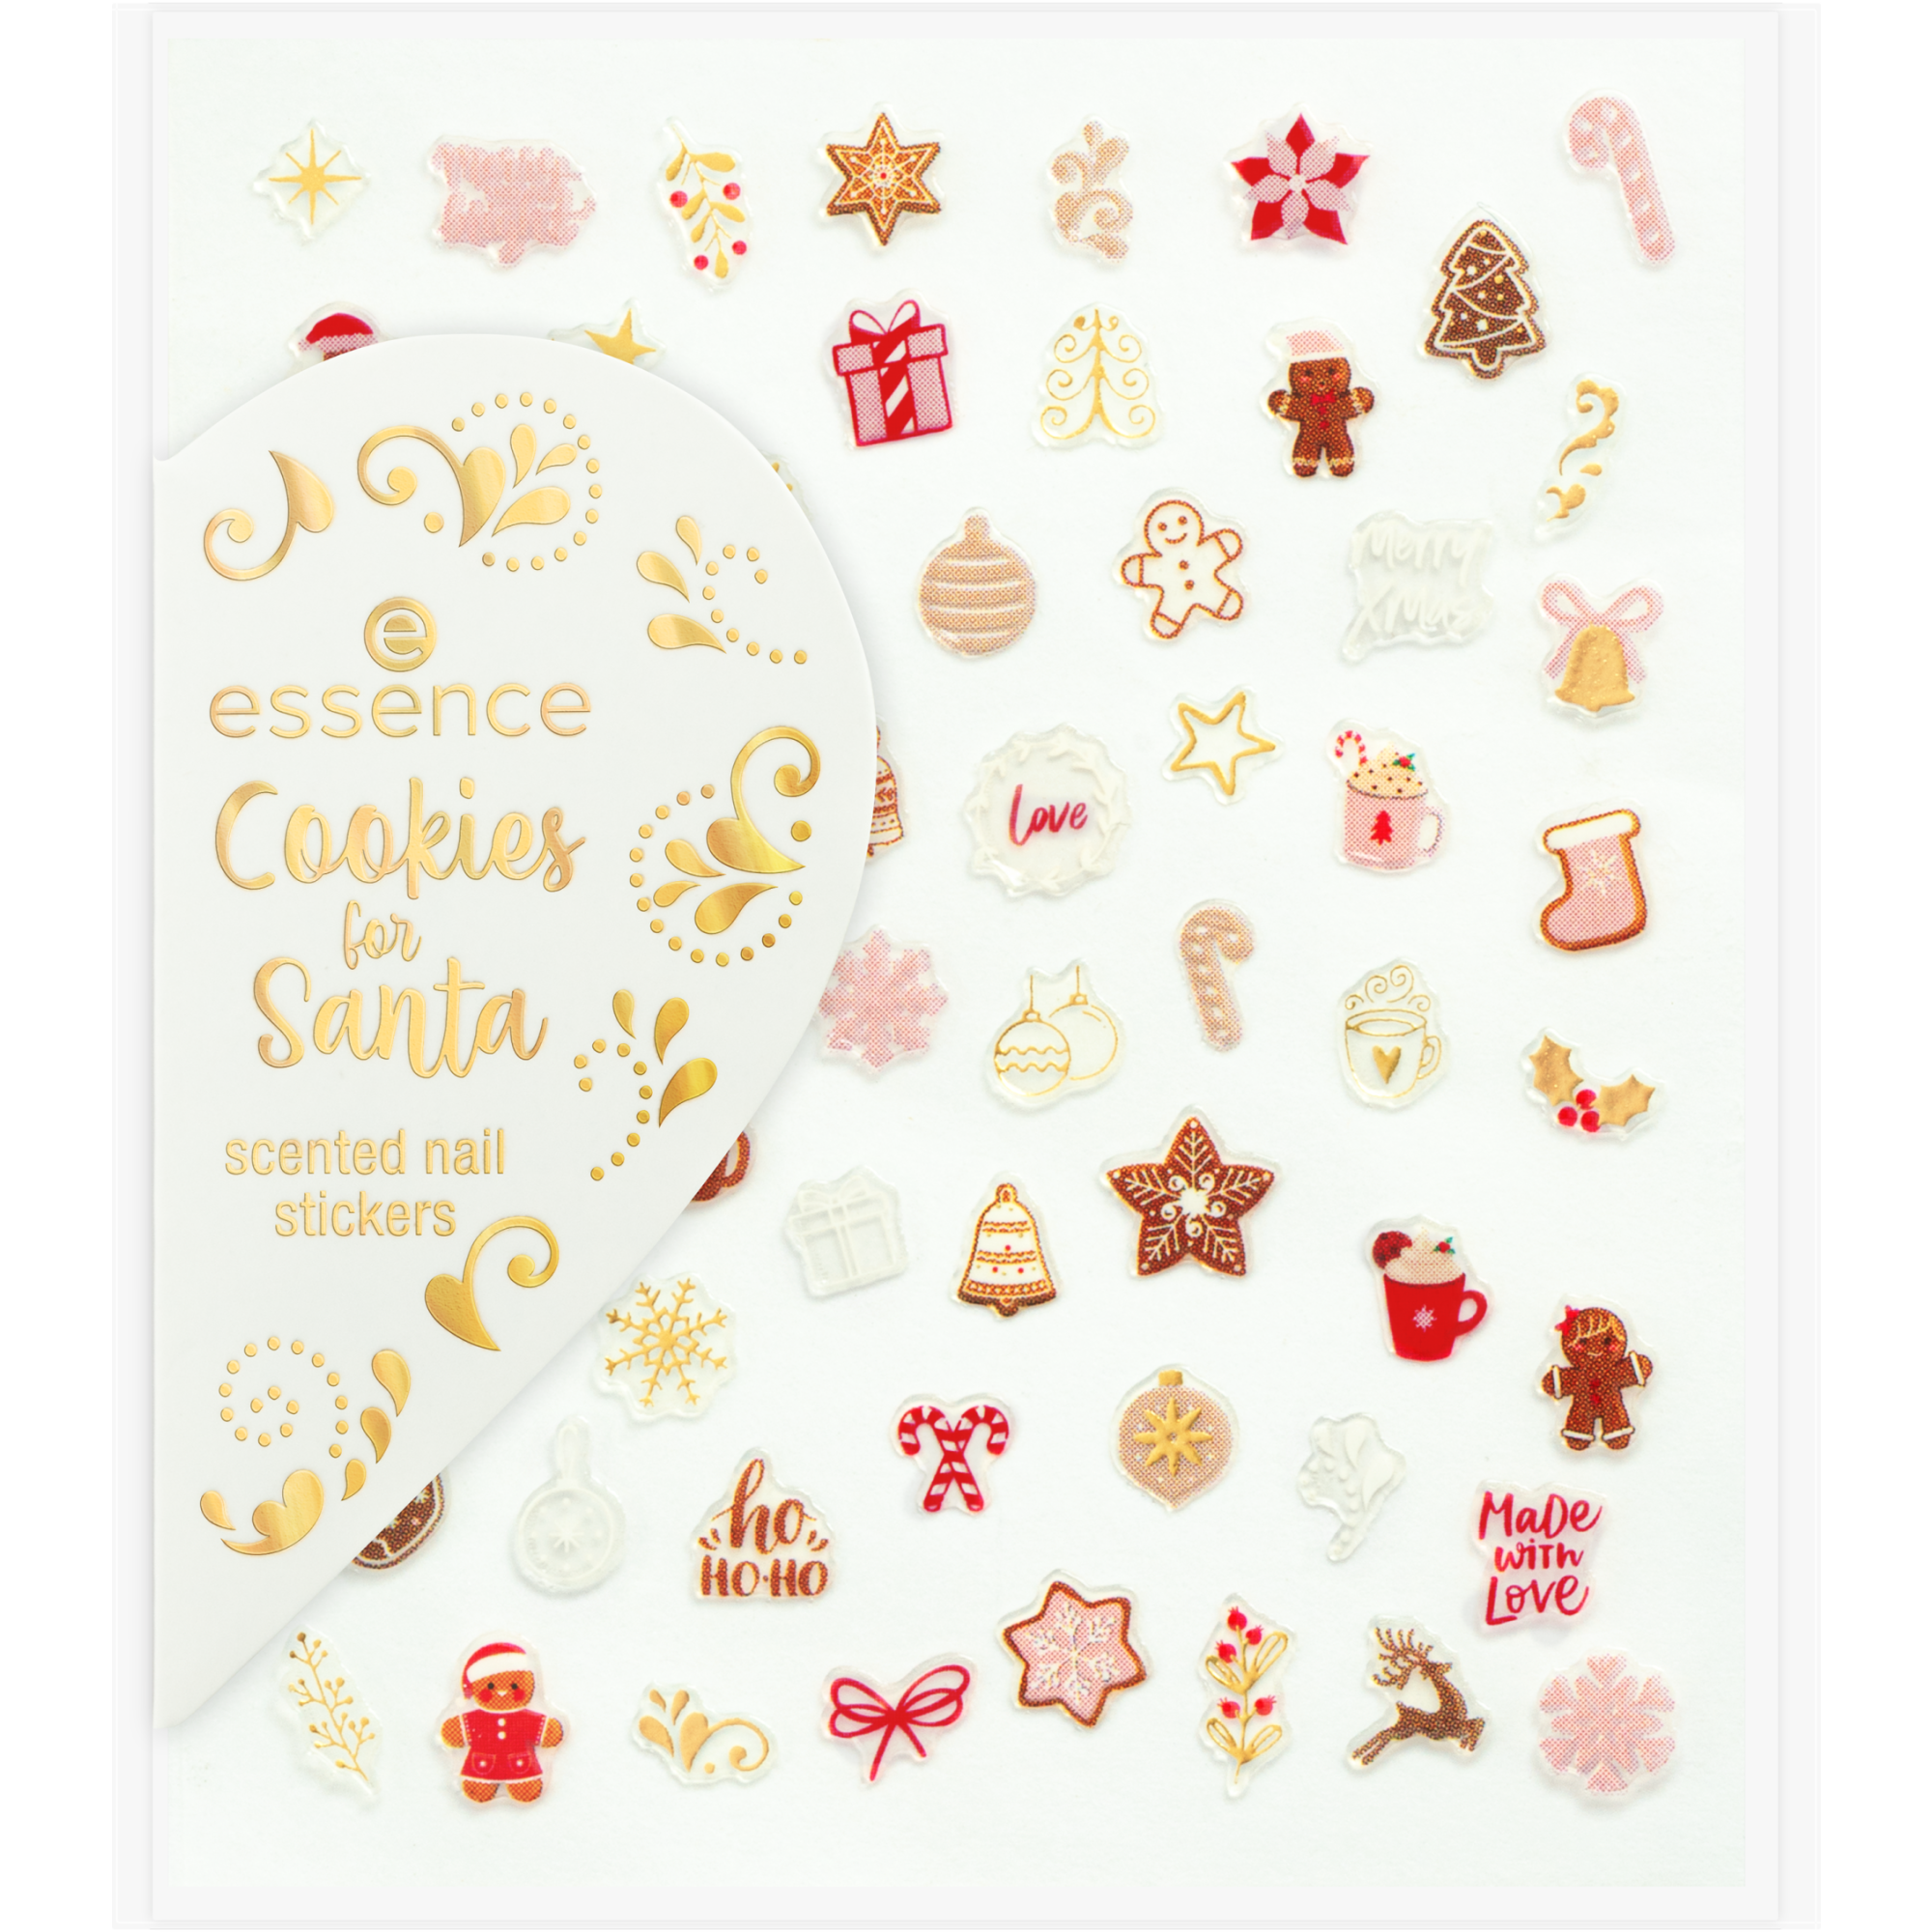 Cookies for Santa scented nail stickers